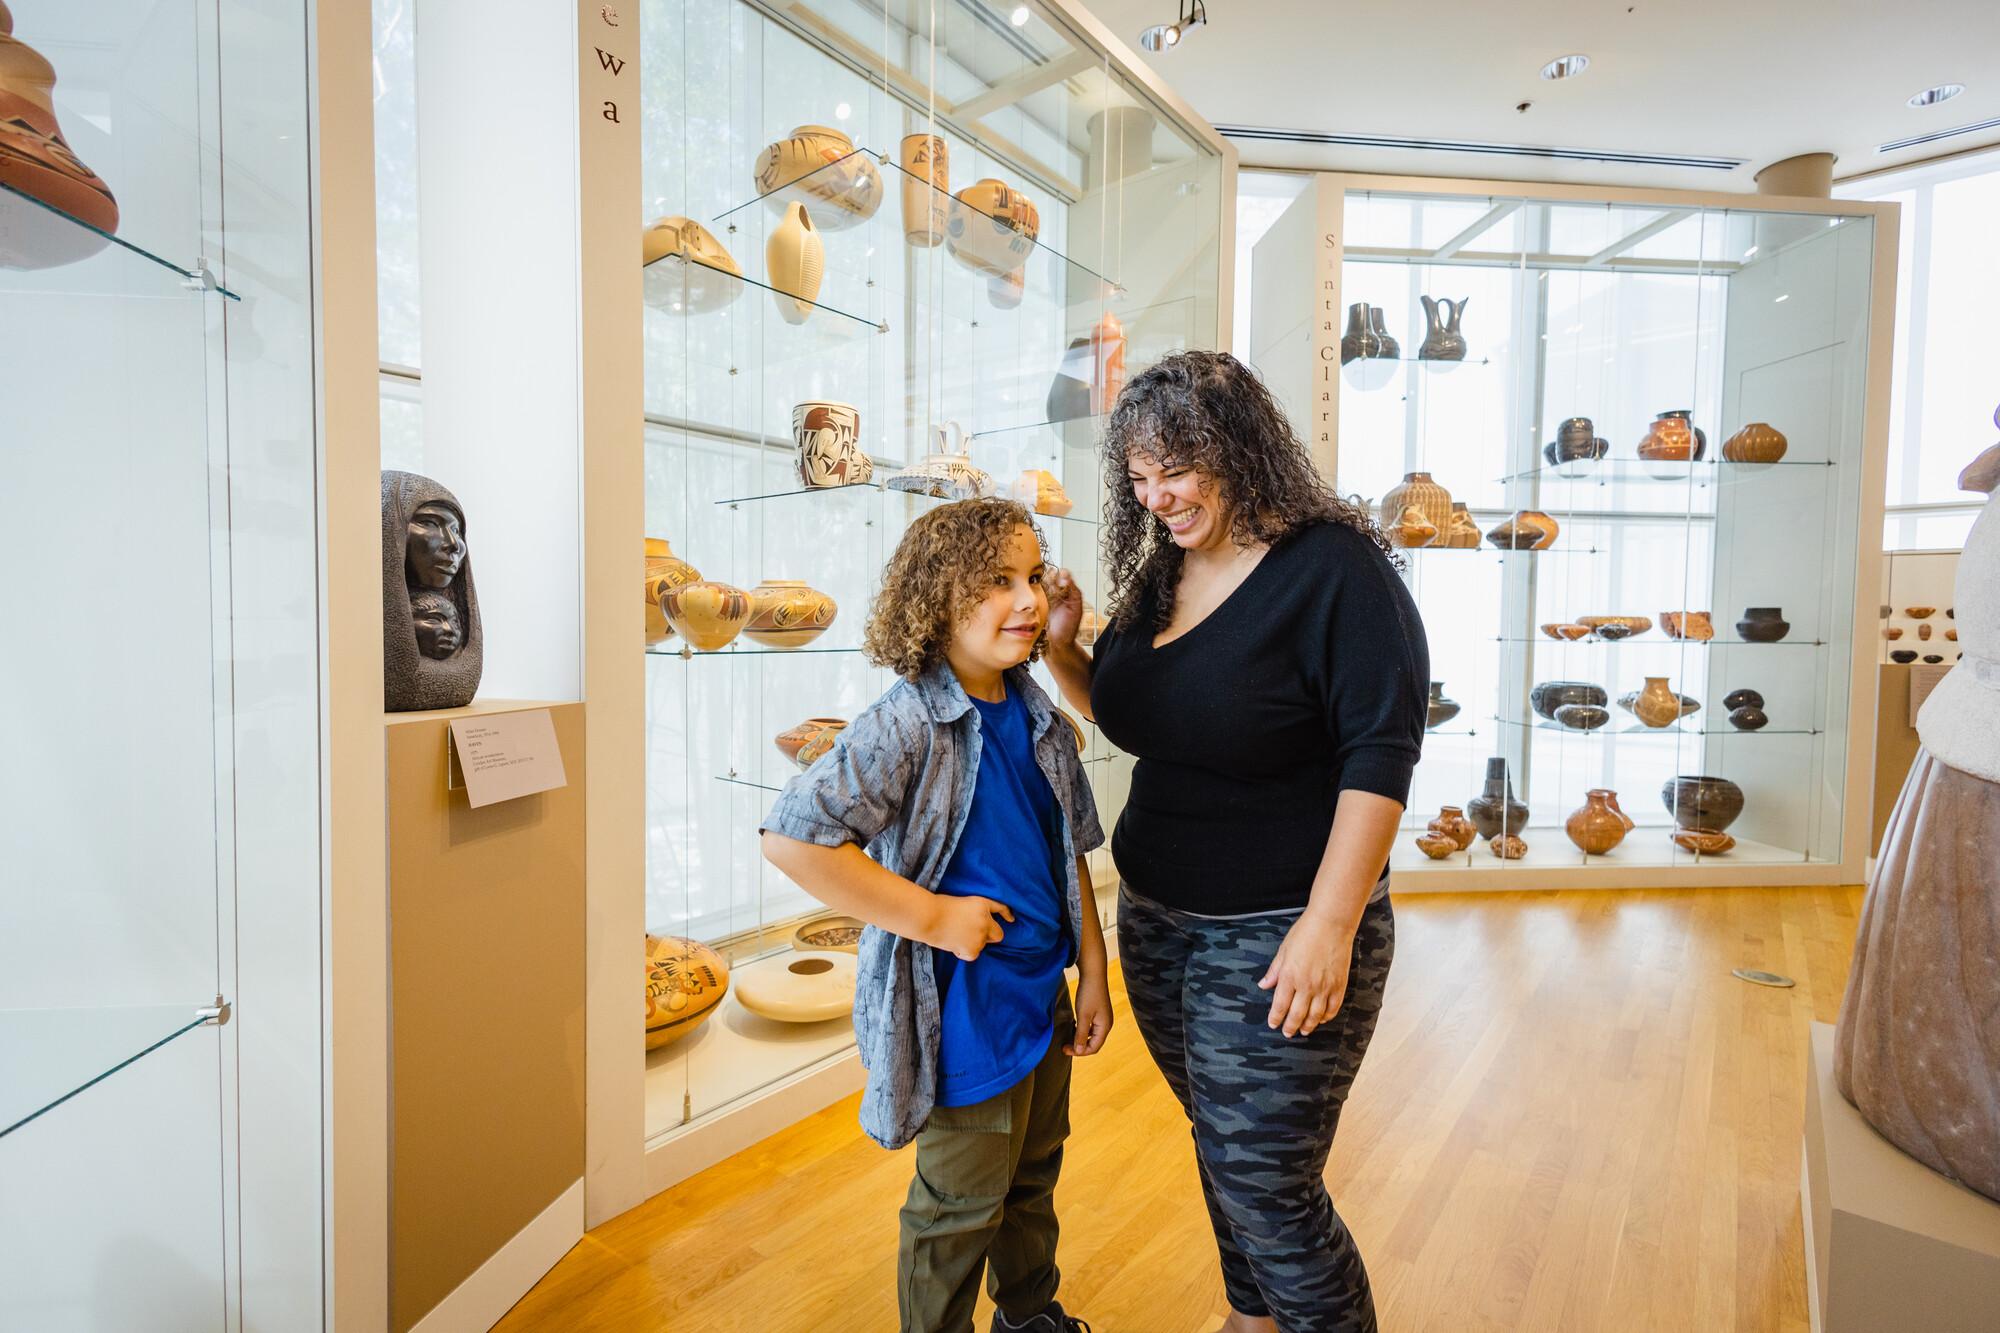 A mother with shoulder-length curly grey hair wearing a black shirt and dark pants stands in one of the Crocker's galleries laughing. A child with chin length curly hair wearing a light blue collared shirt over a bright blue shirt and pants, stands next to her, also laughing.